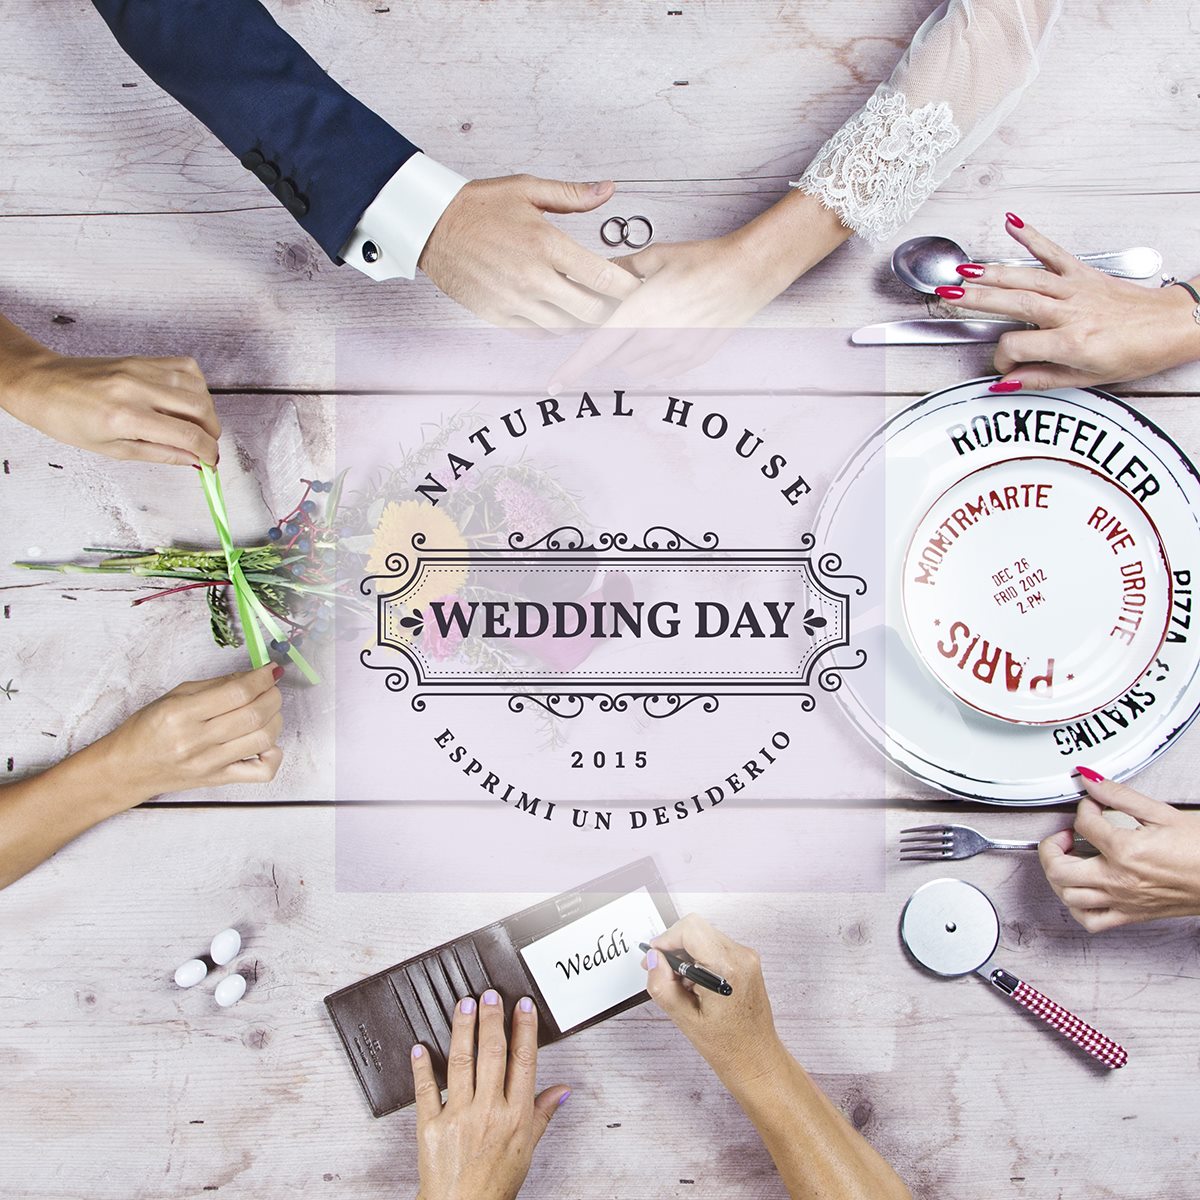 Natural House Wedding Day 2015